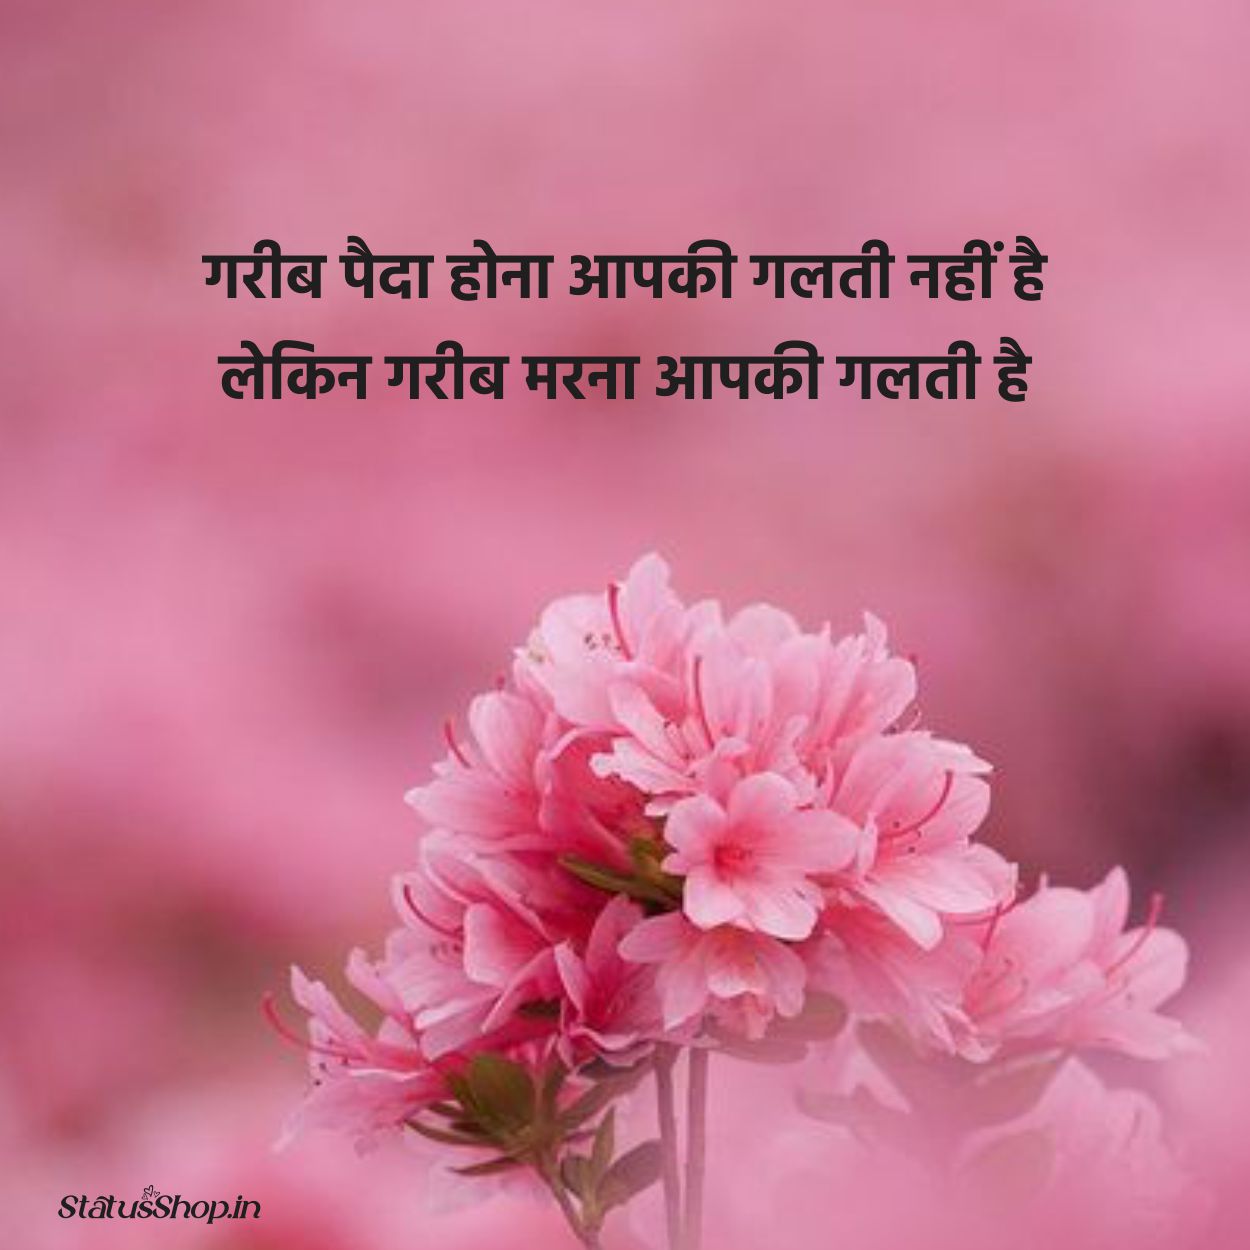 Latest-Motivational-Quotes-in-Hindi